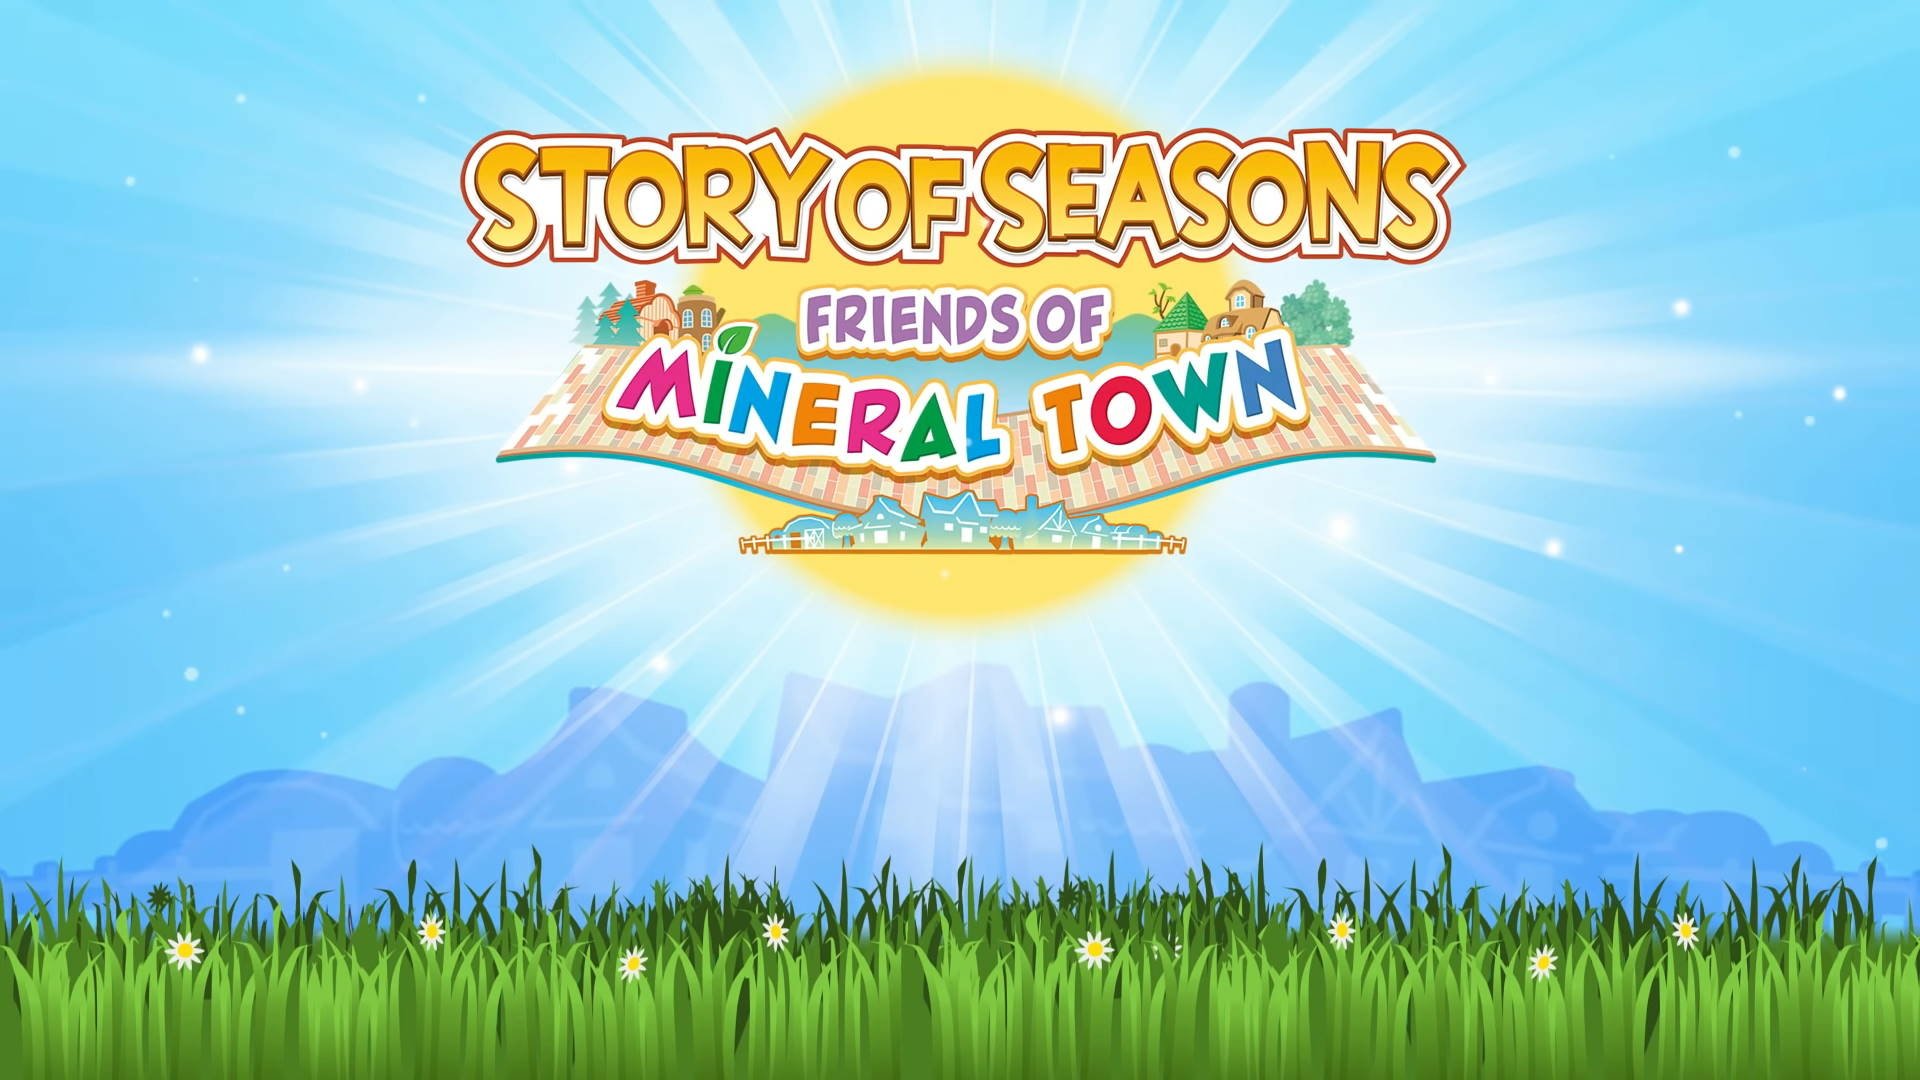 Story of Seasons: friends of Mineral Town. Seasons background. Minerals Wallpaper.